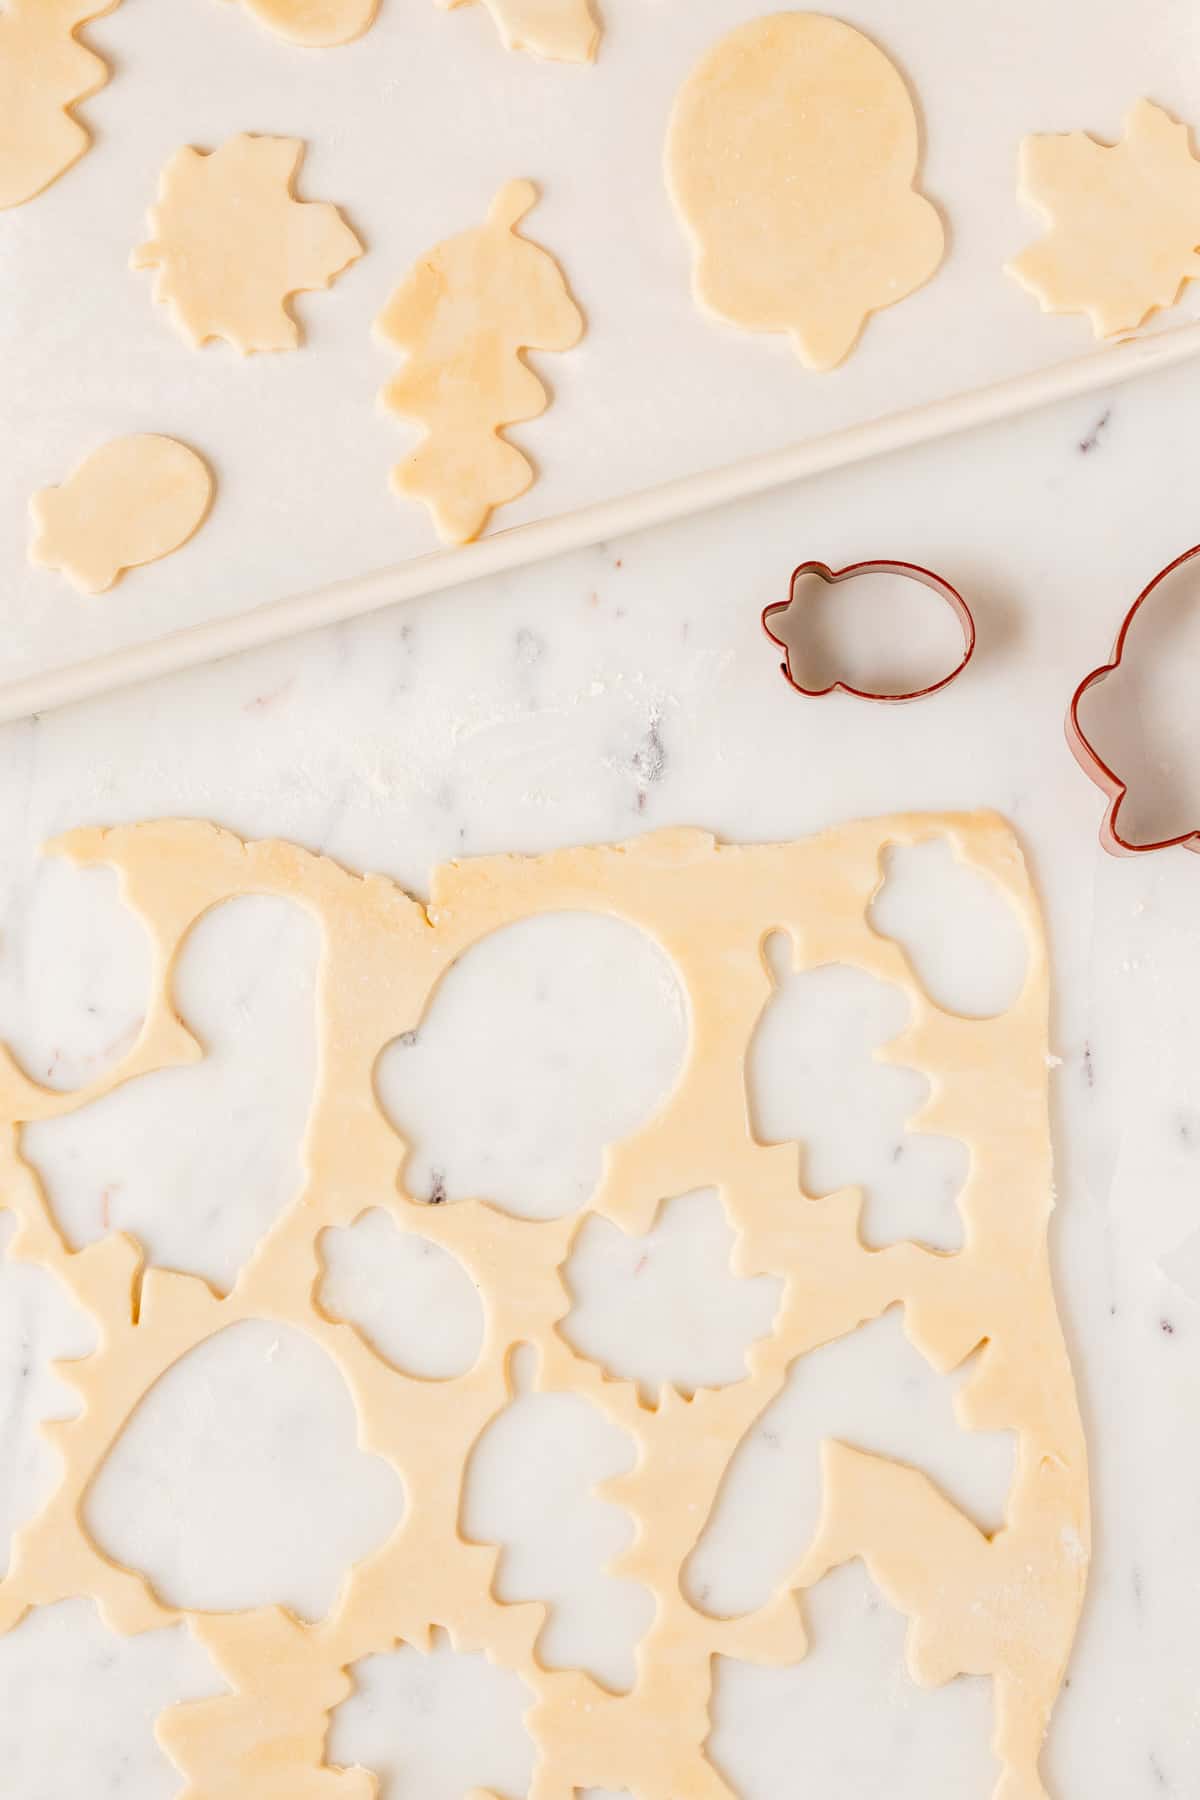 pie crust scraps with fall-shaped cut outs and the cut out cookies on a white cookie sheet